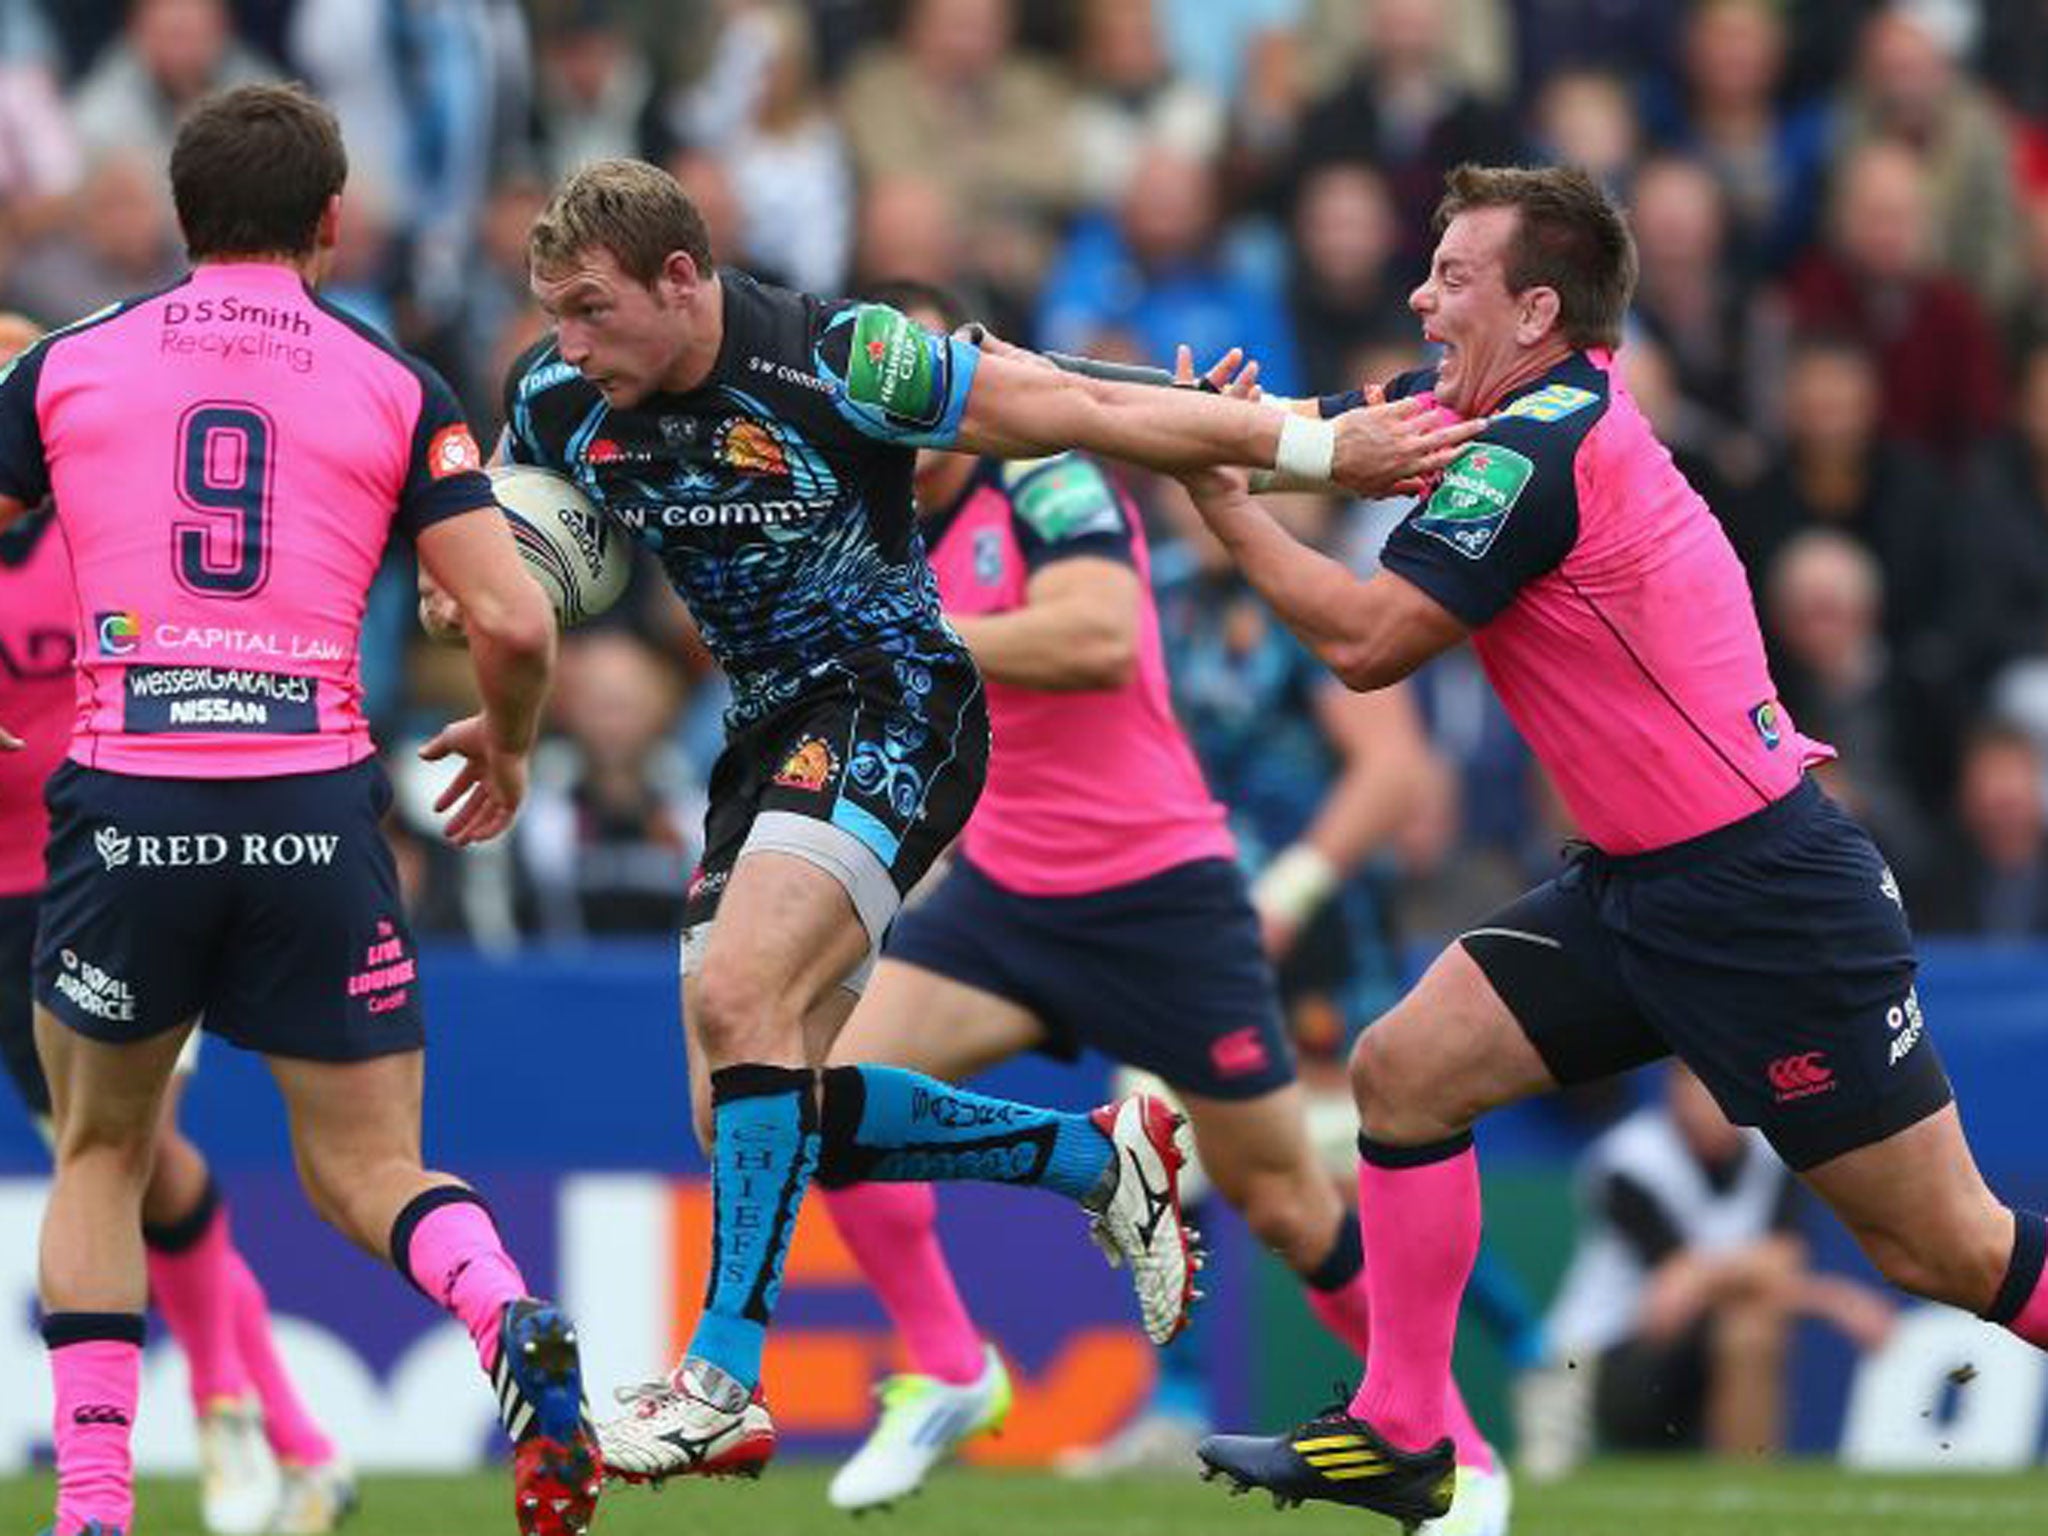 Exeter wing Matt Jess blasts through the Cardiff defence to score a try at Sandy Park